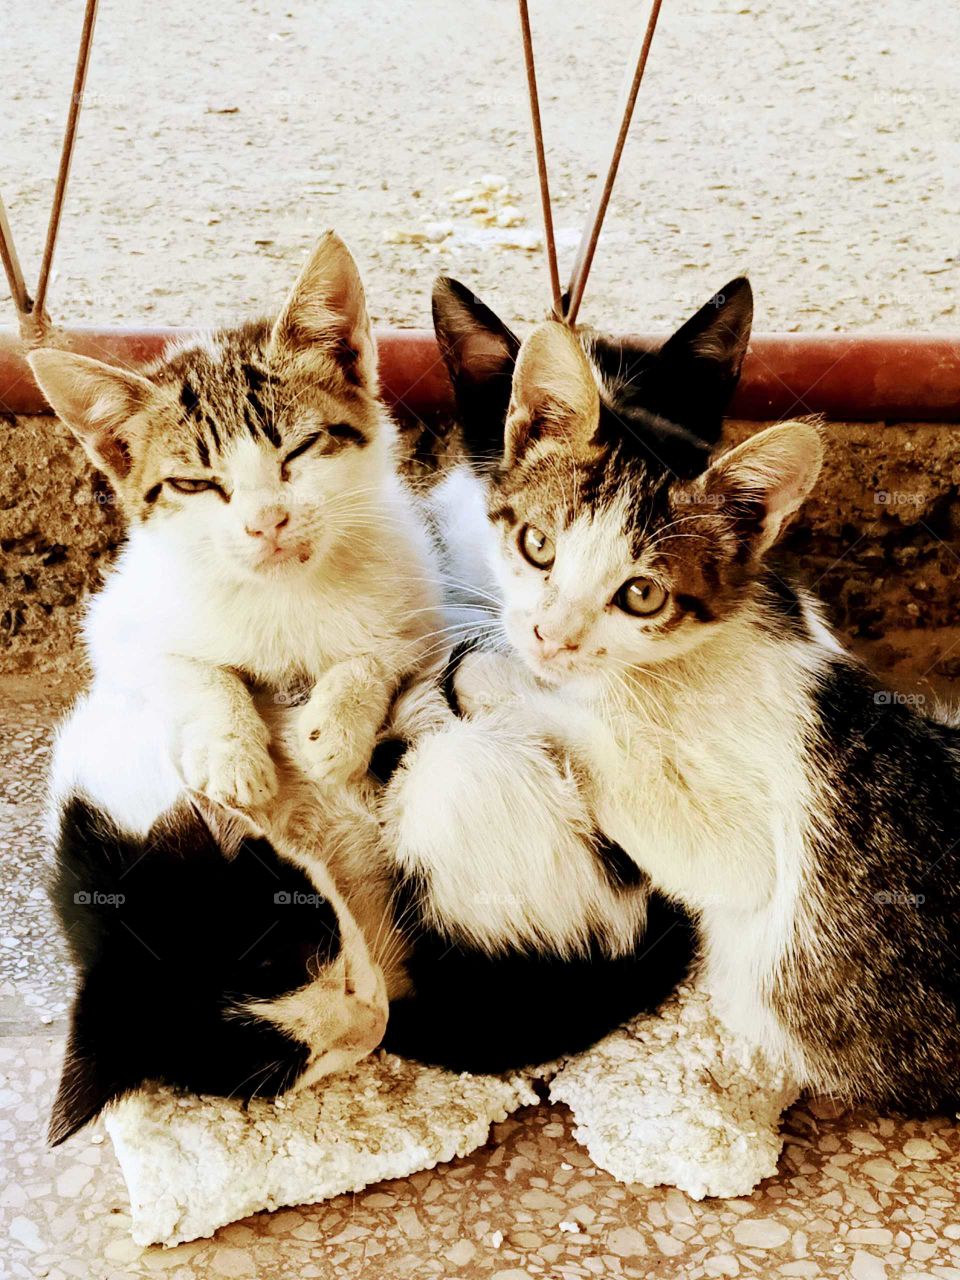 Amazing small cats live in the street.I have seen them and decided to take a photo.They are so beautiful..